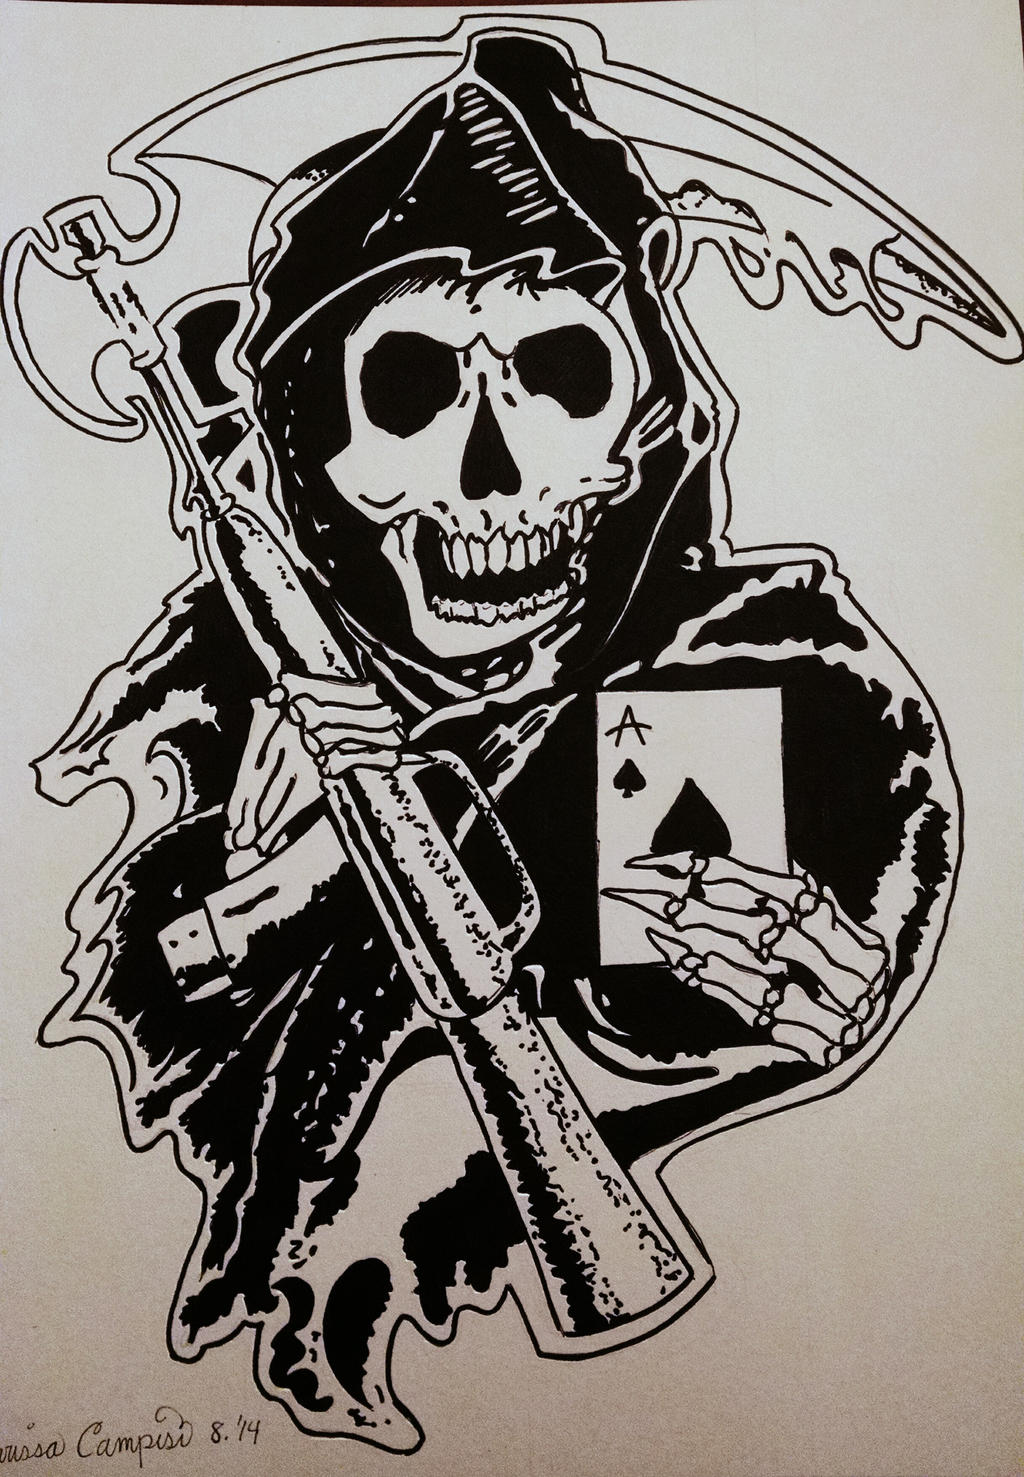 Sons of Anarchy Tattoo Design